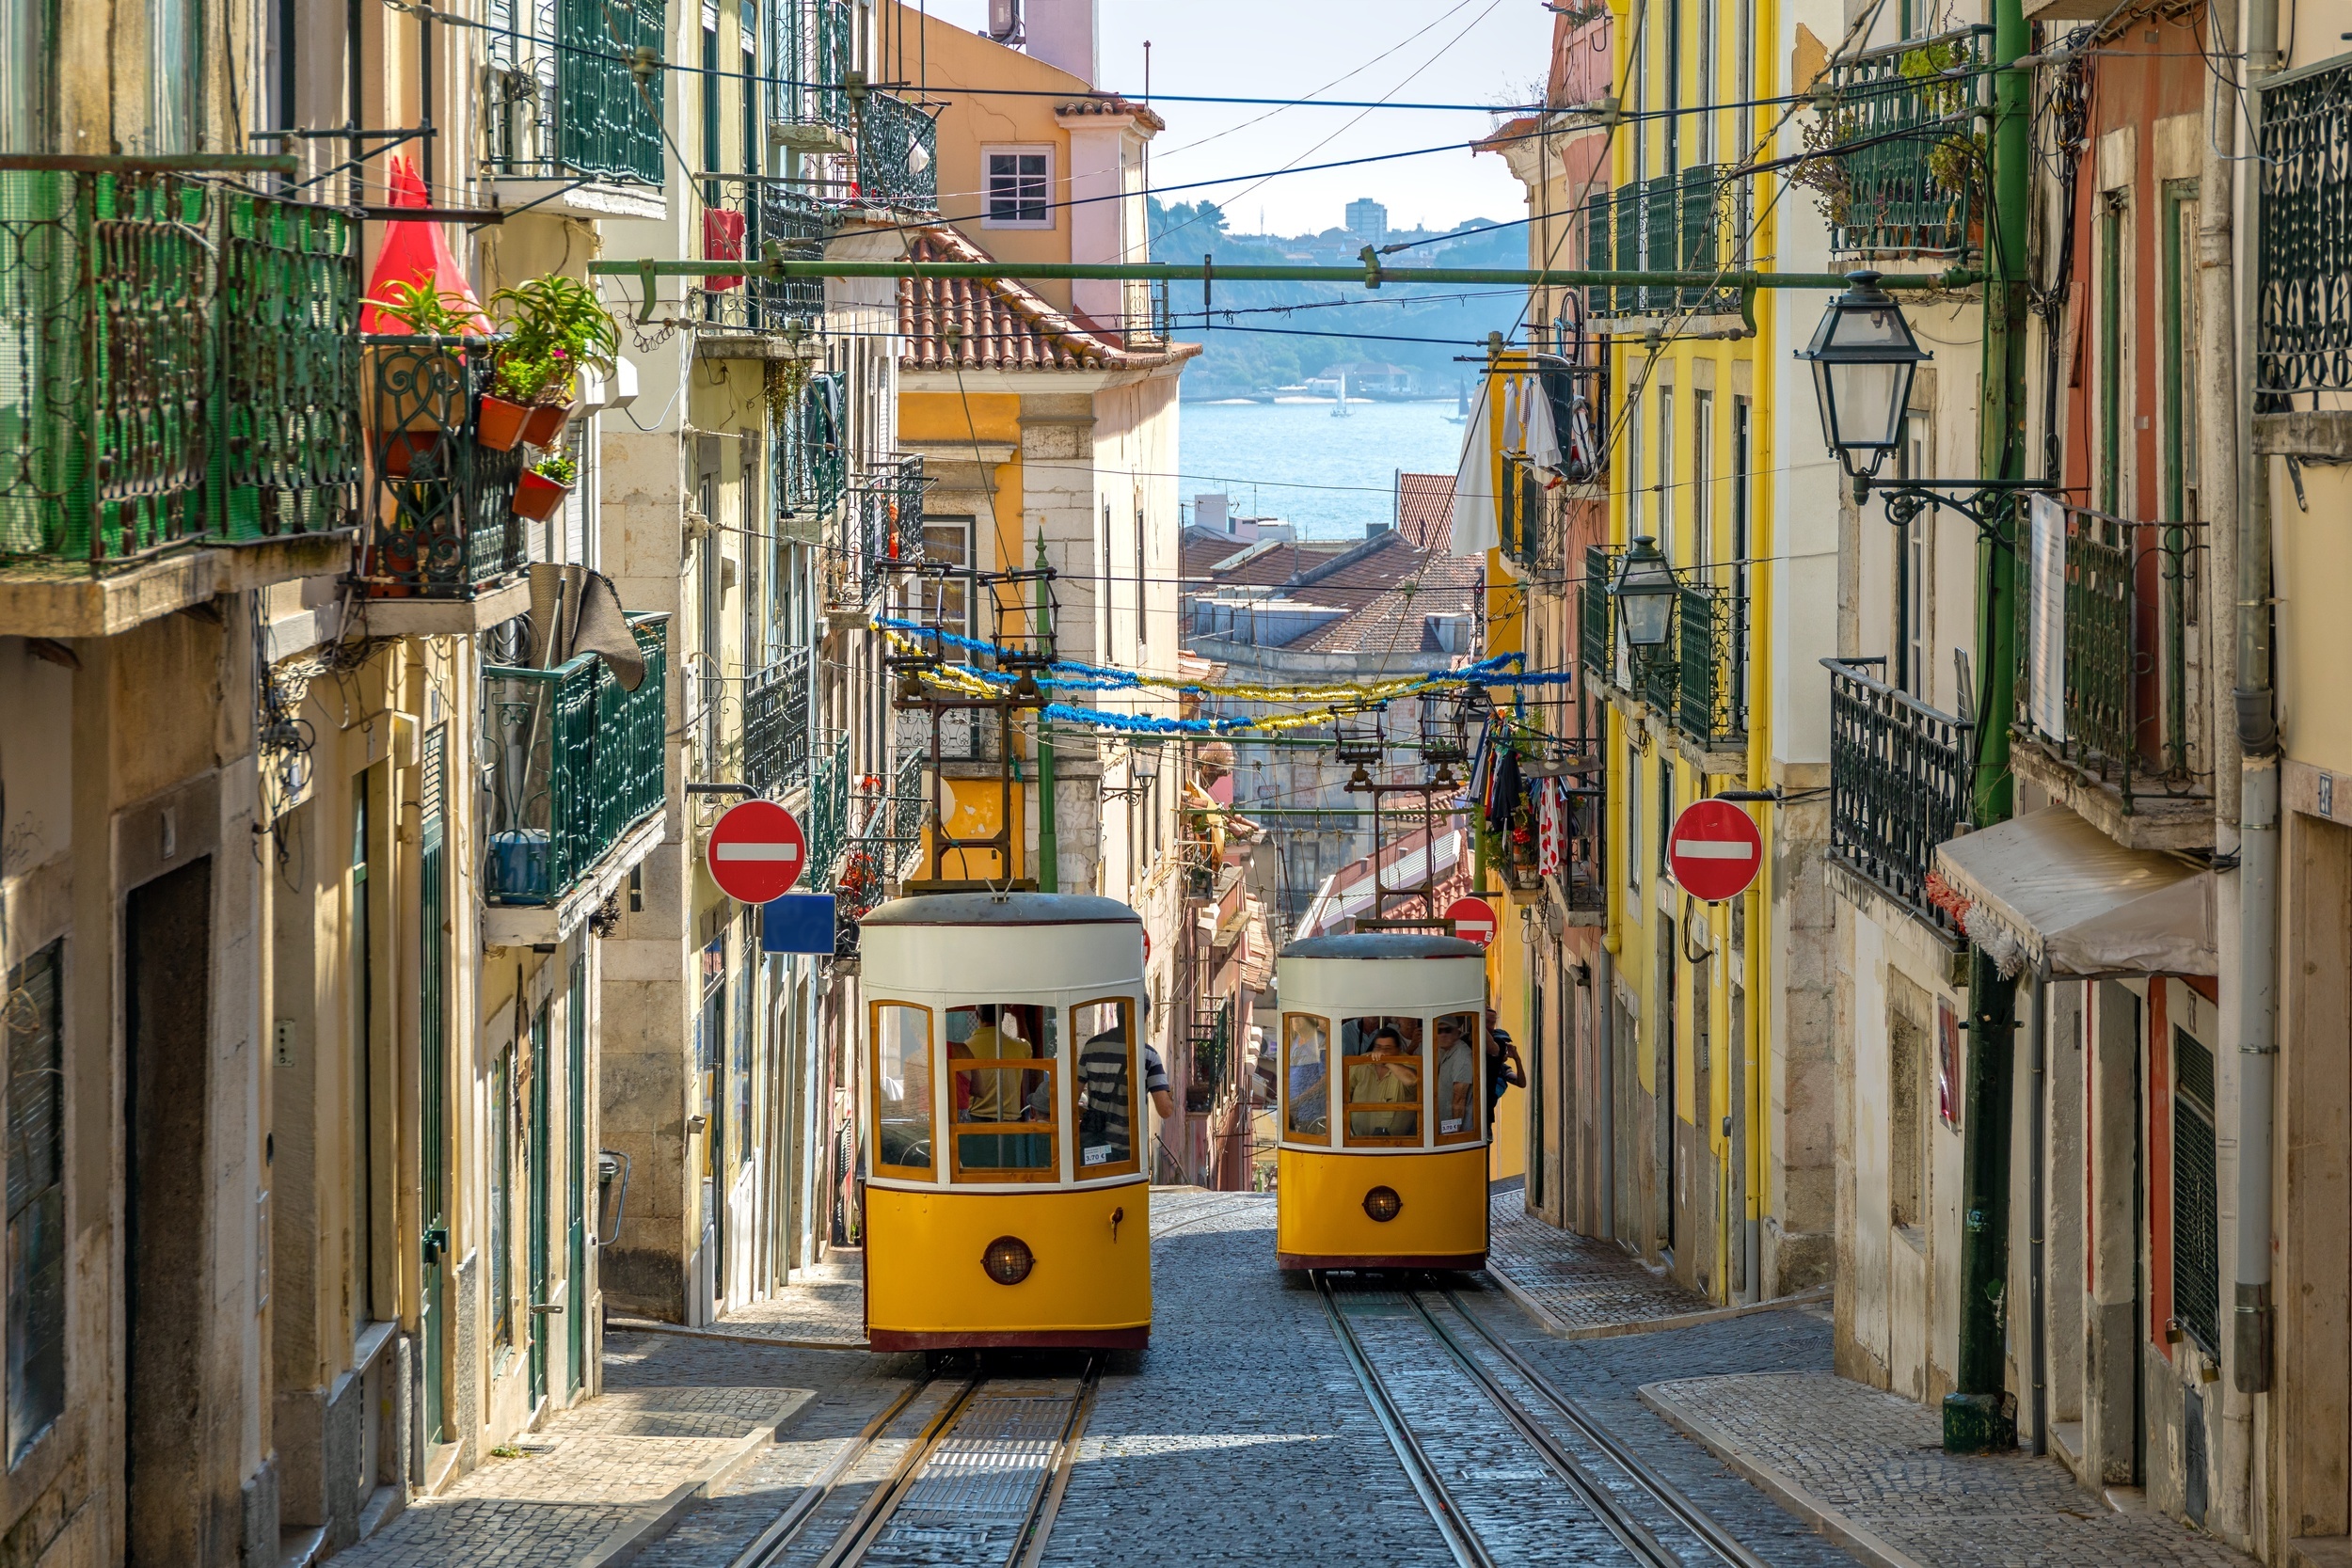 <p>Famously hilly Lisbon (like San Fransisco) isn’t the place to expect a leisurely stroll. However, if you’re up for some “urban hiking,” you’ll get a great workout while passing the street cars.</p><p>You may also like: <a href='https://www.yardbarker.com/lifestyle/articles/25_of_julia_childs_most_famous_dishes_110723/s1__21500041'>25 of Julia Child's most famous dishes</a></p>